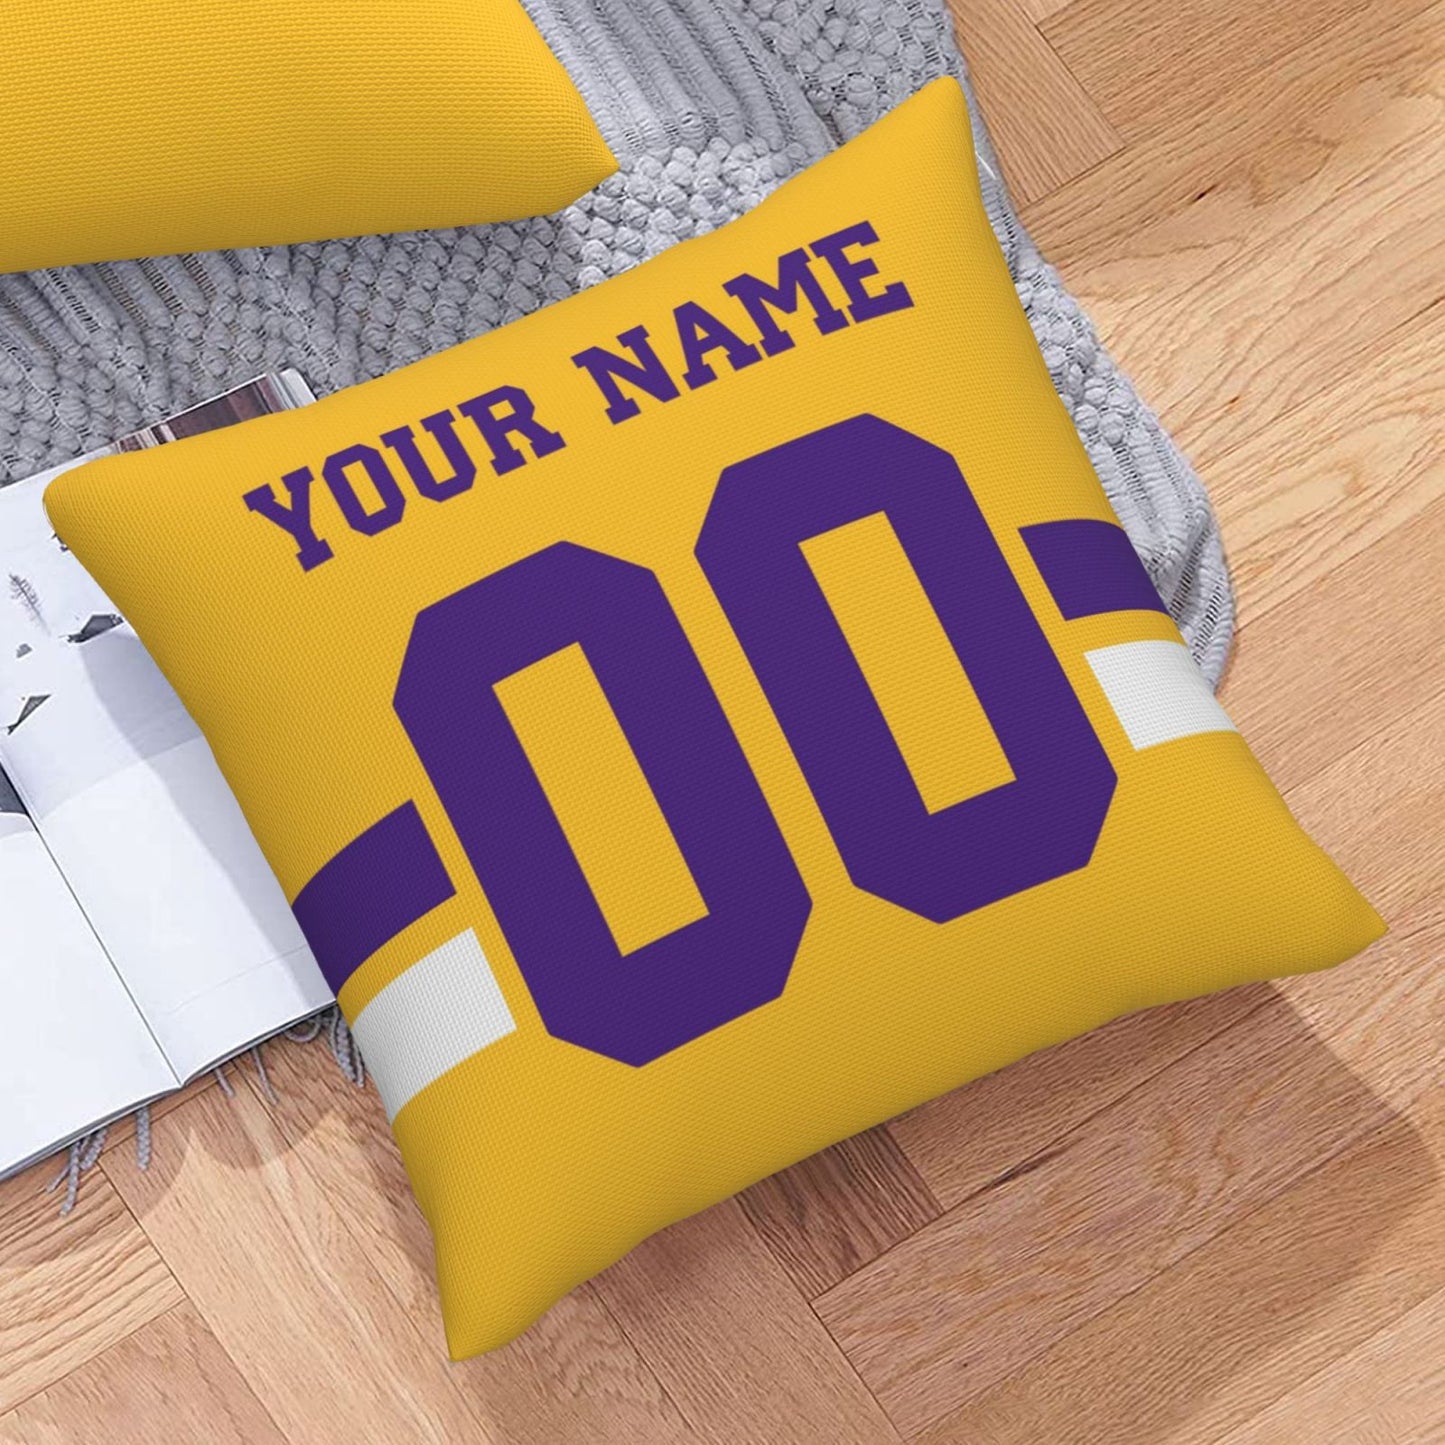 Customized Minnesota Vikings Football Team Decorative Throw Pillow Case Print Personalized Football Style Fans Letters & Number Orange Pillowcase Birthday Gift